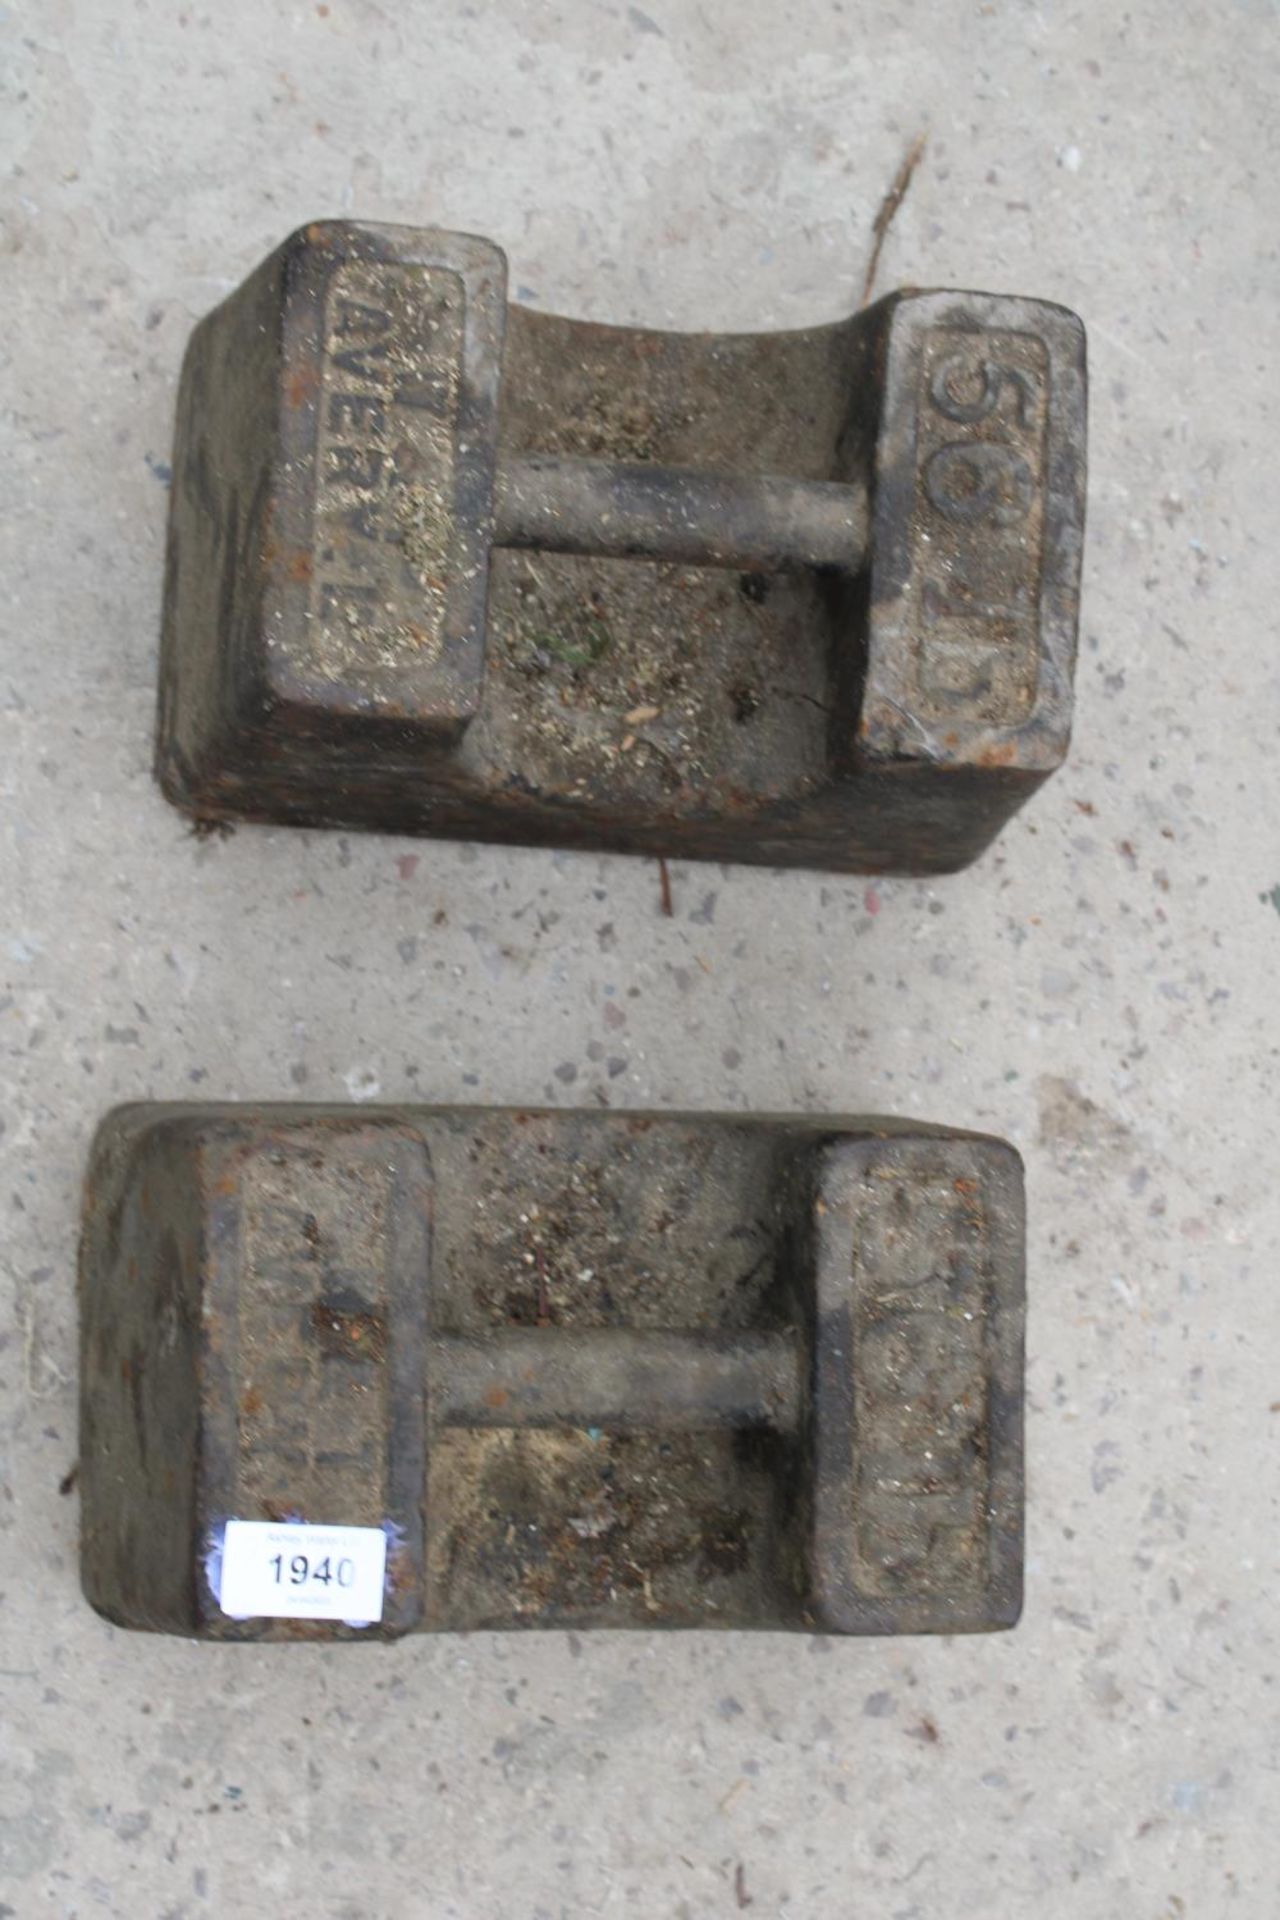 TWO VINTAGE CAST IRON 56LB WEIGHTS - Image 2 of 2